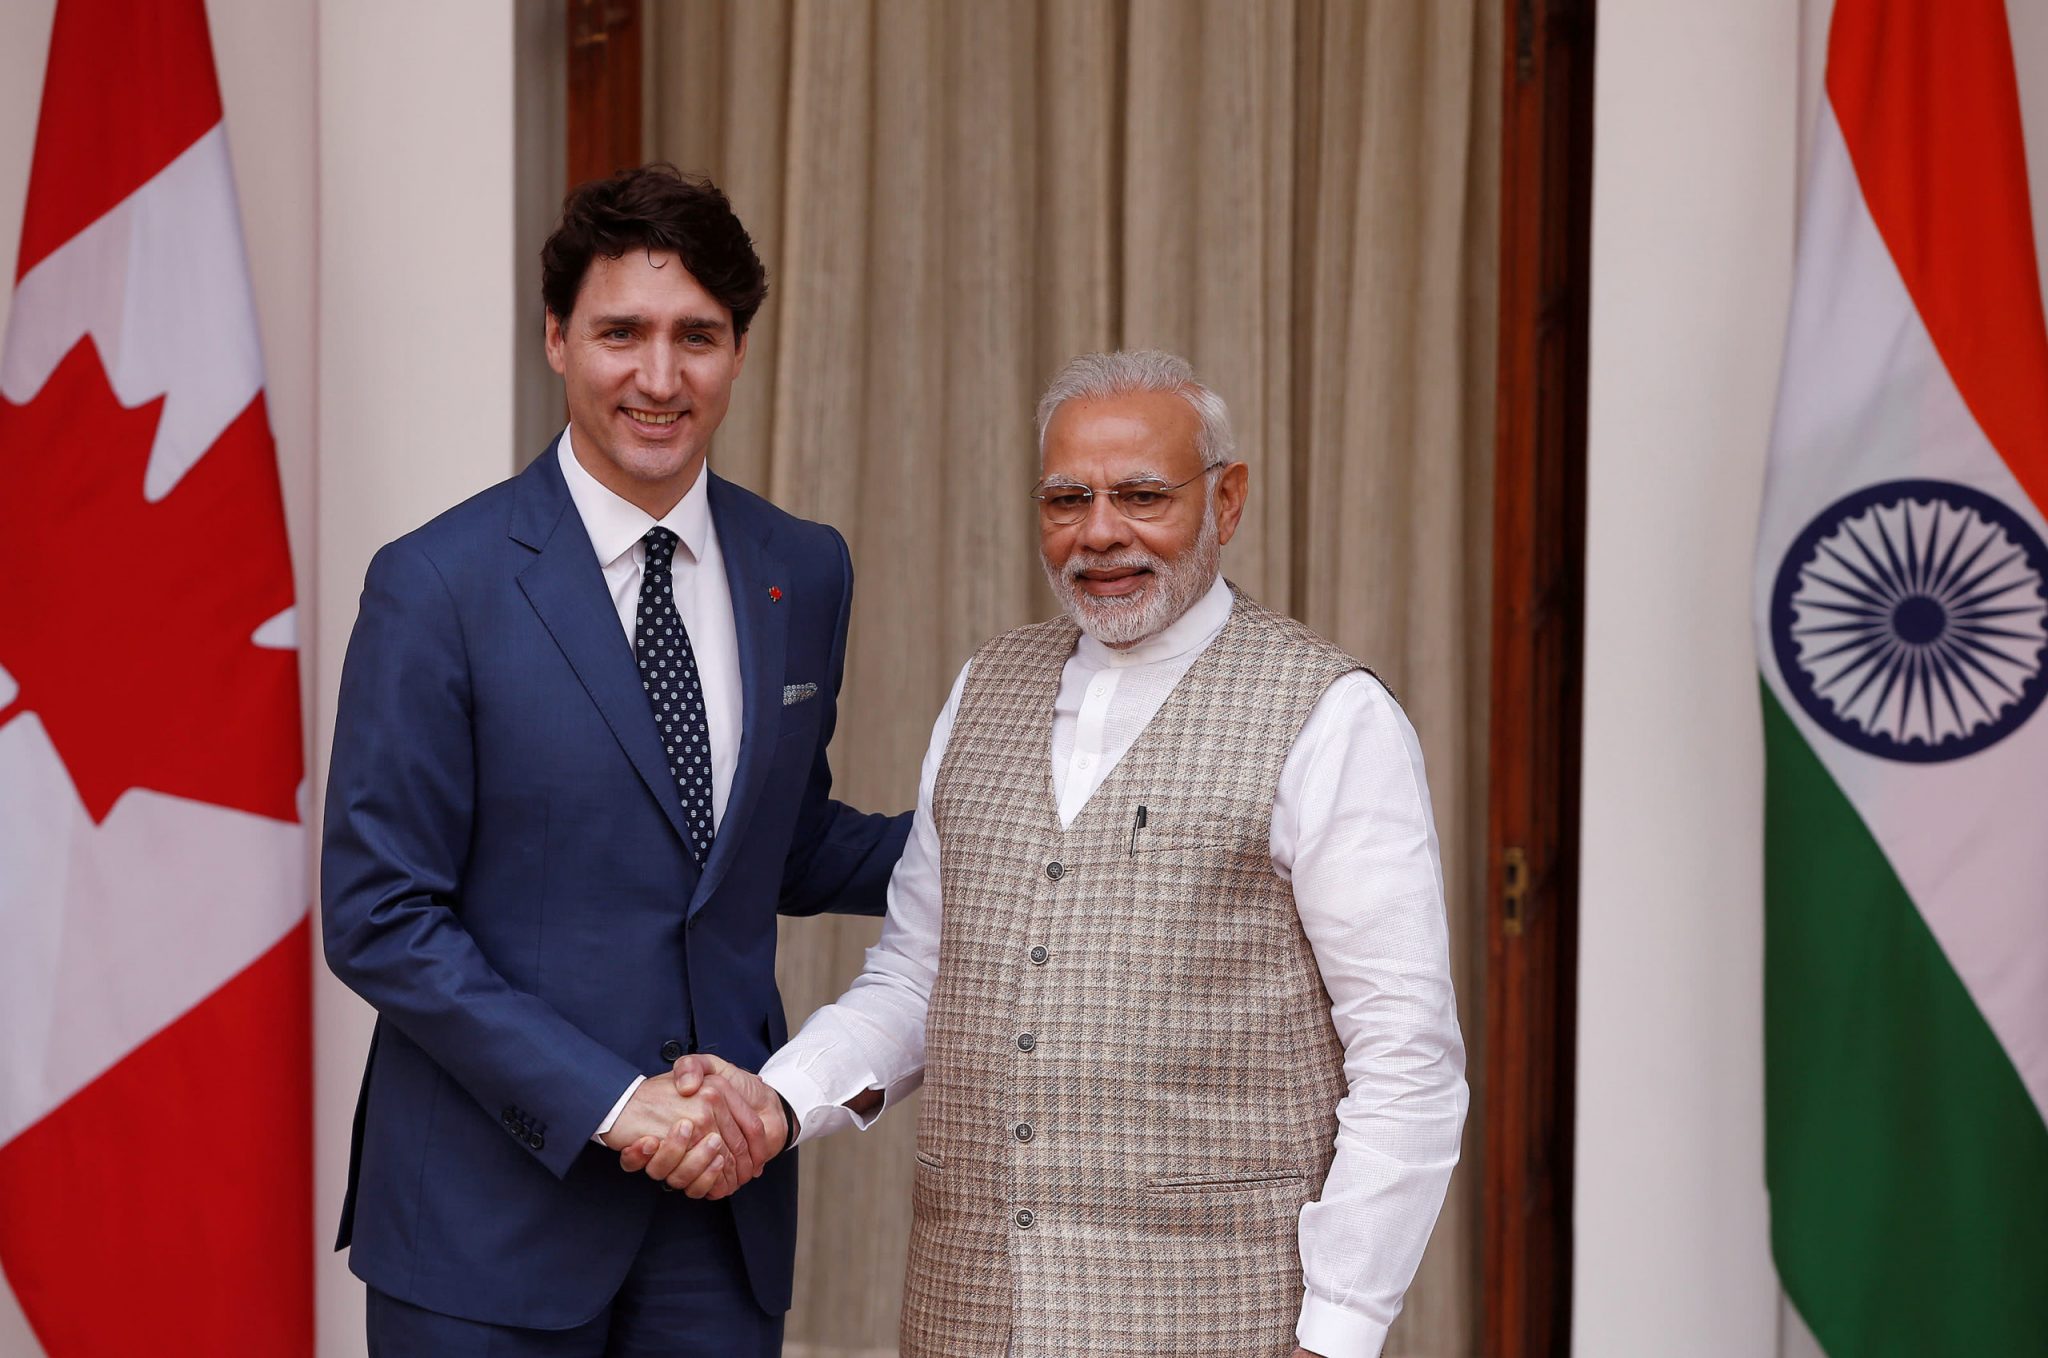 Trudeau's Remarks On Farmers may impact ties with India